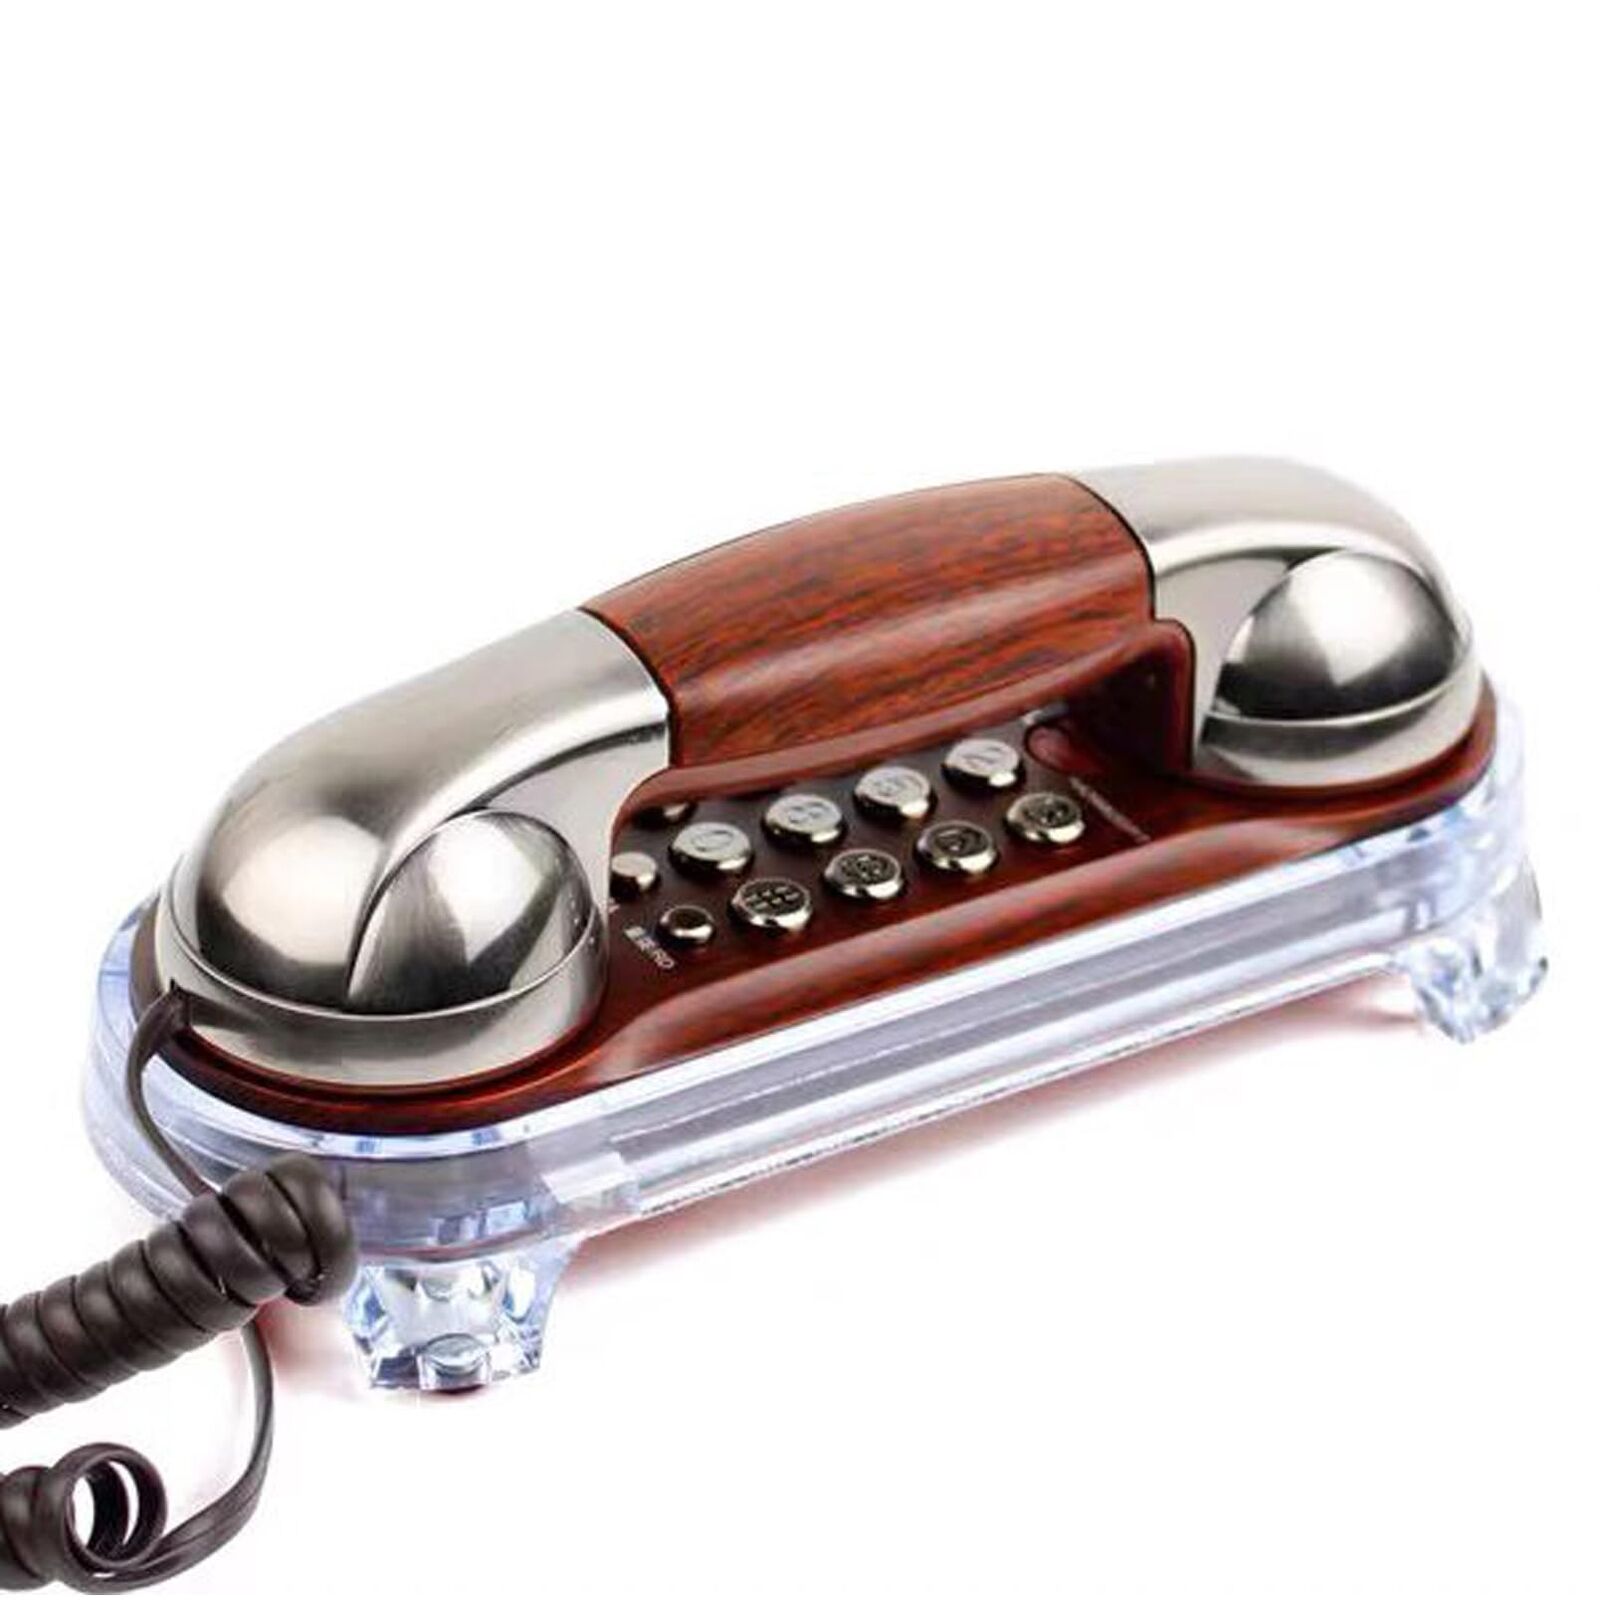 TelPal Small Size Trimline Corded Phone Antique Small Retro Wall Mounted Tele...